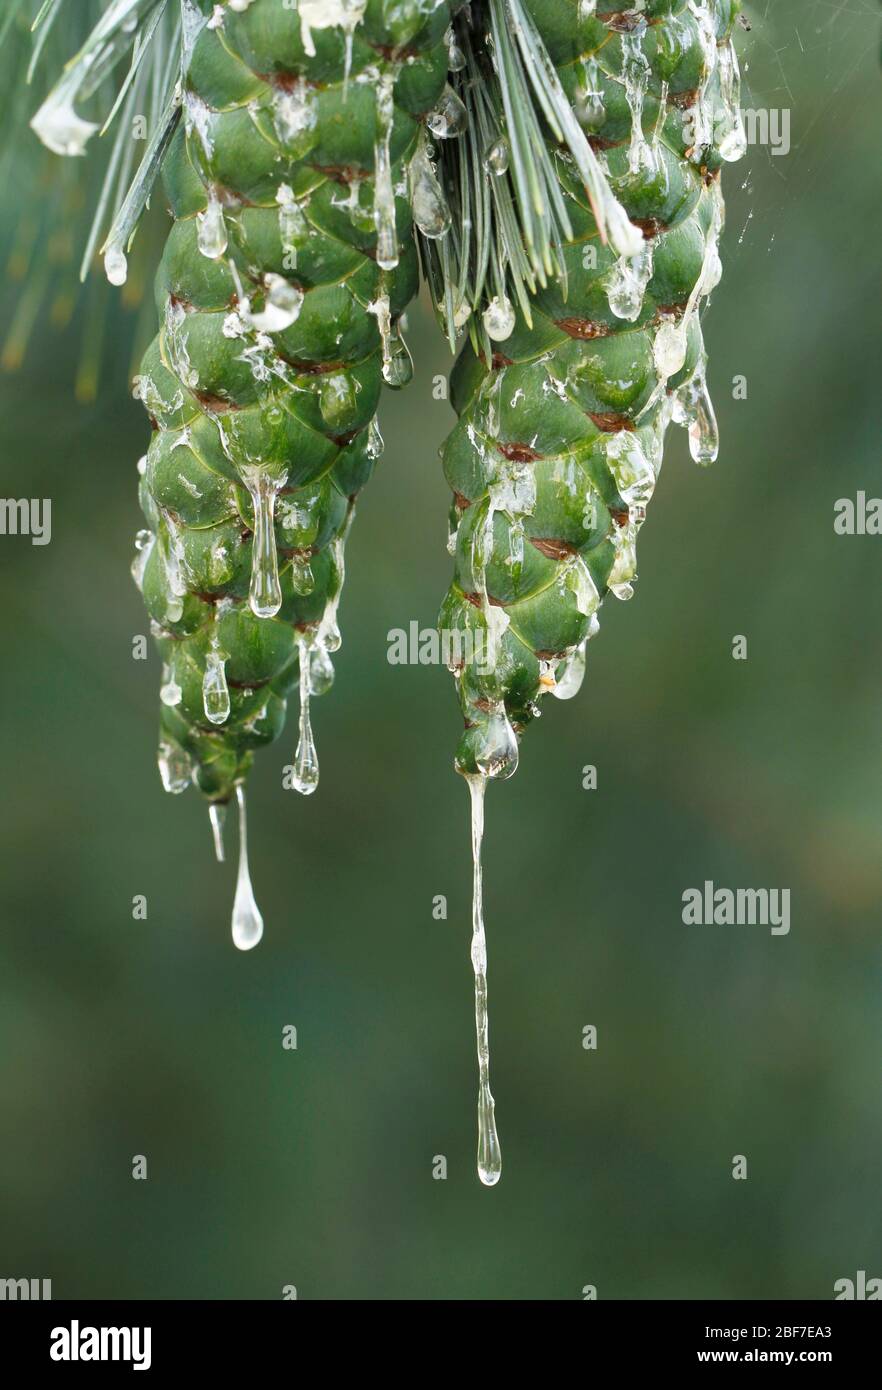 Swiss stone pine, Pinus sembra, unripe green cones with lots of resin drops in Finland. Stock Photo